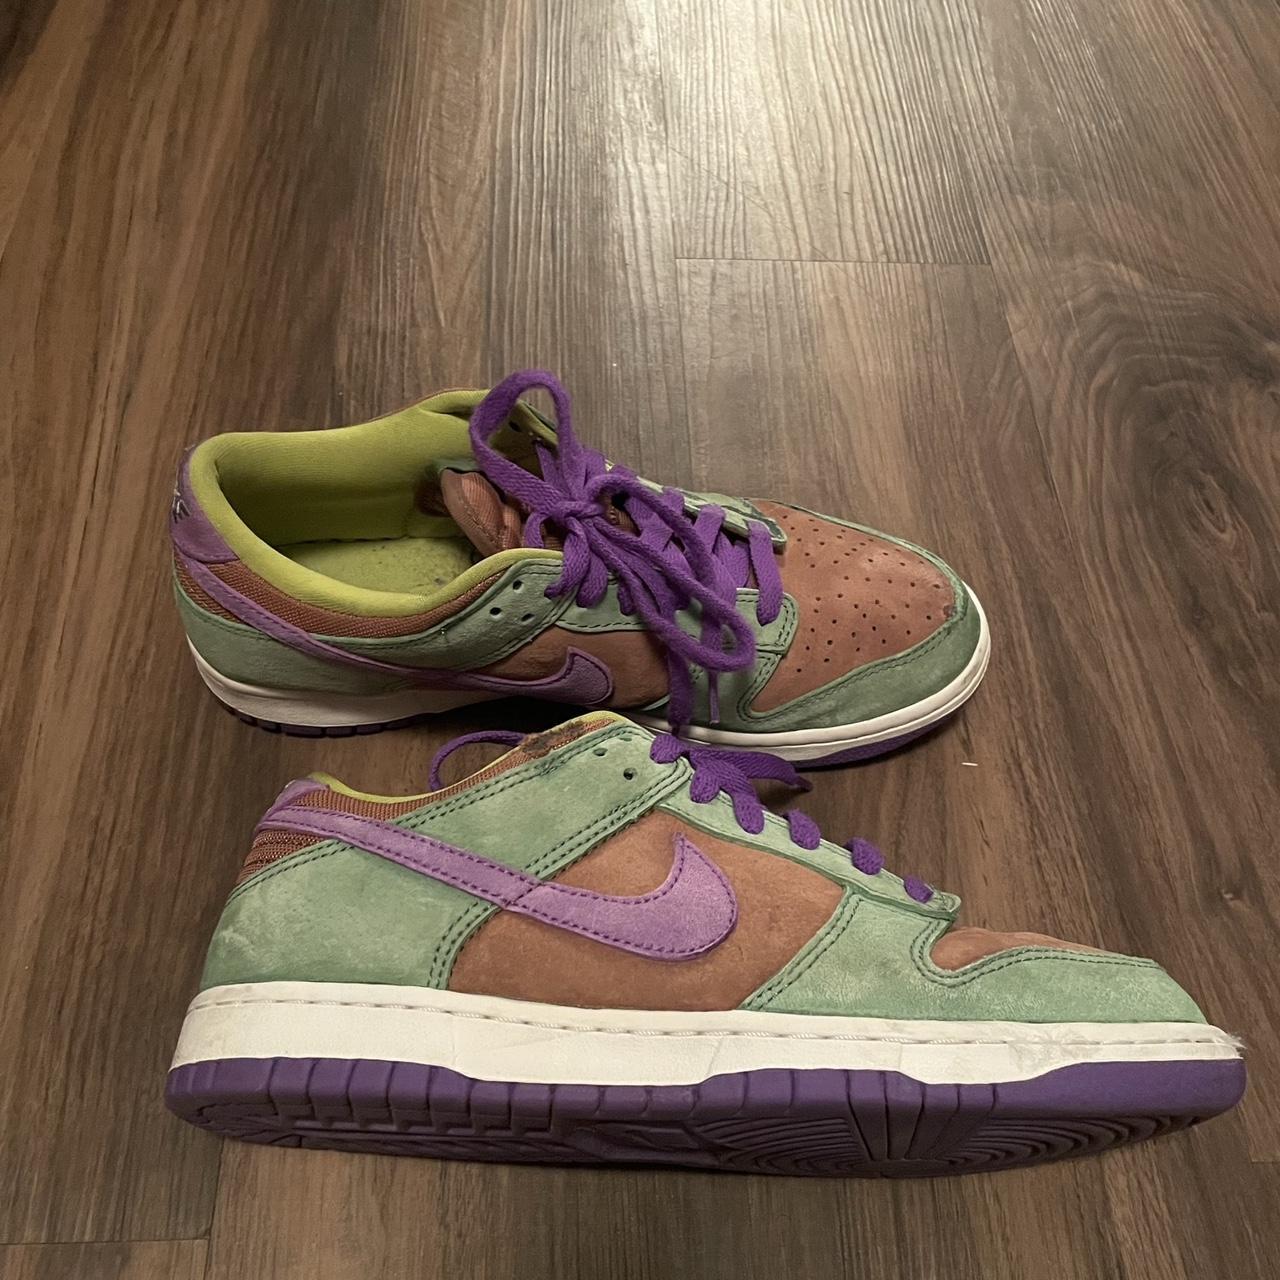 These the ScoobyDoos Nike dunks... Depop